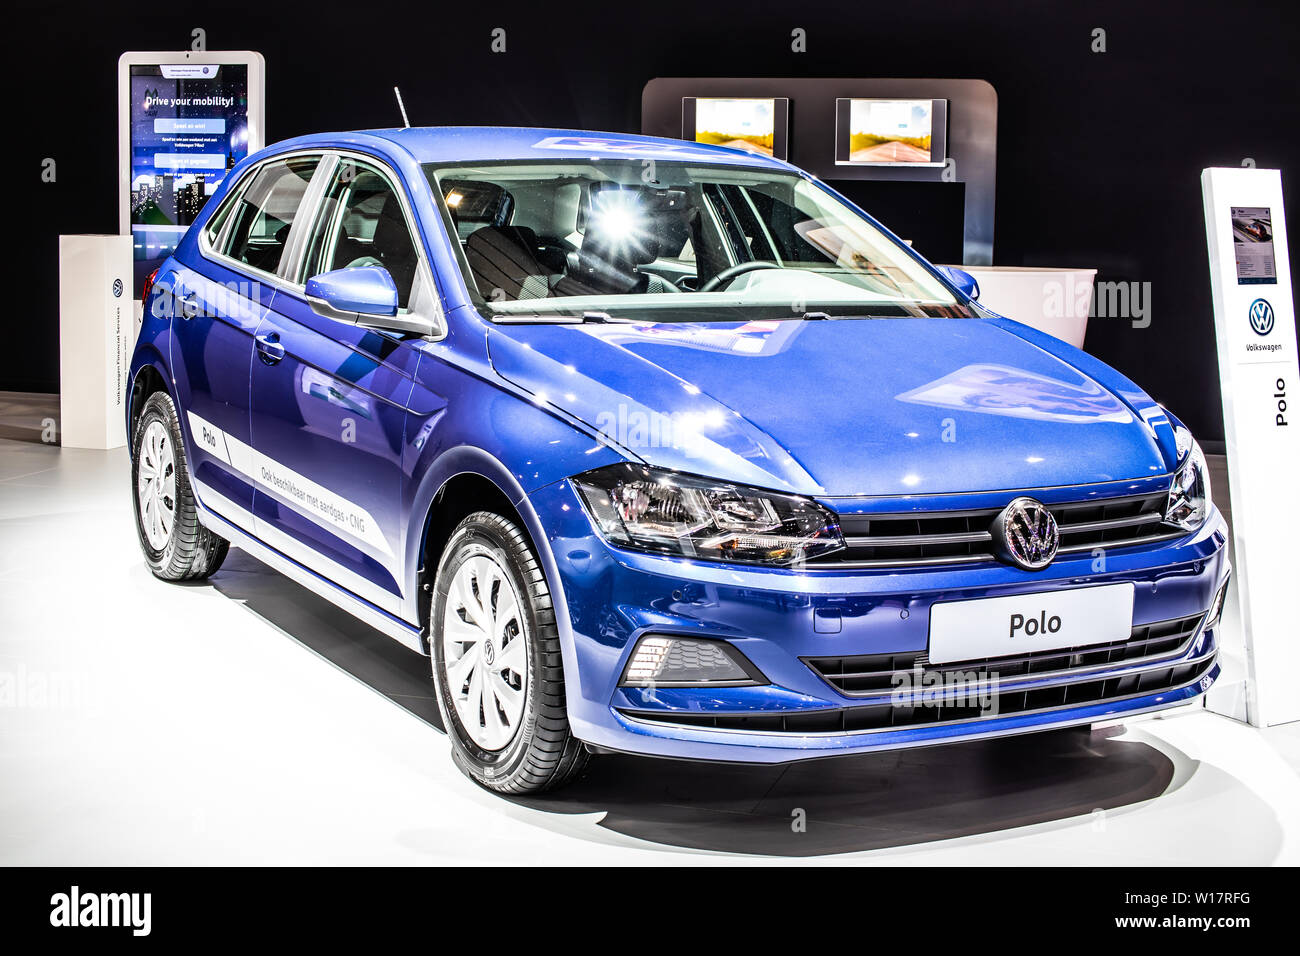 linen base Melodic Brussels, Belgium, Jan 2019: Volkswagen VW Polo at Brussels Motor Show,  Sixth generation, Typ AW, MQB A0 platform, produced by Volkswagen Group  Stock Photo - Alamy